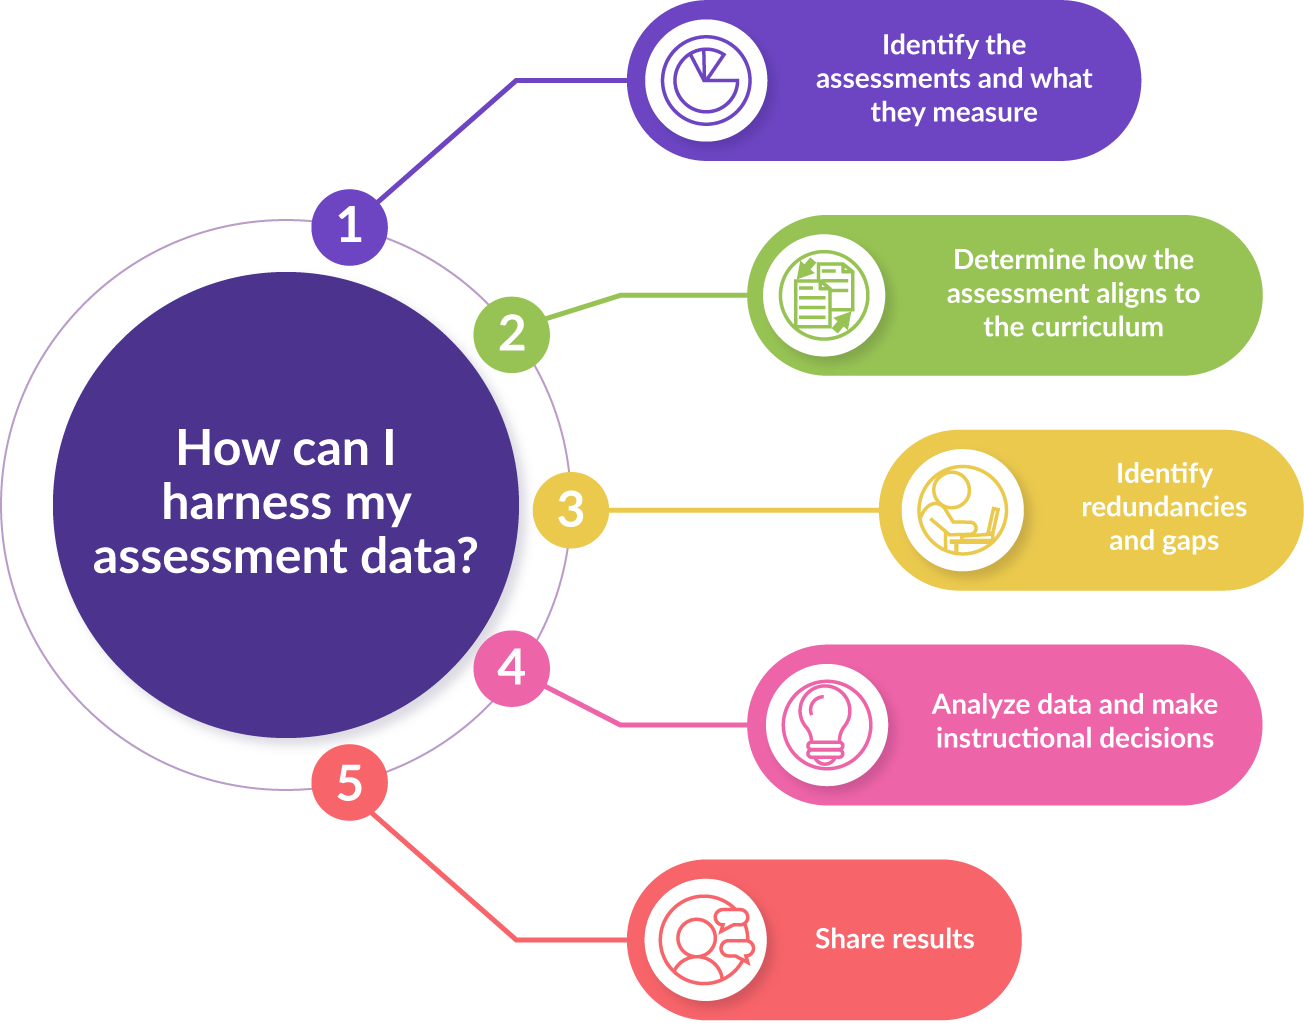 How can I harness my assessment data?